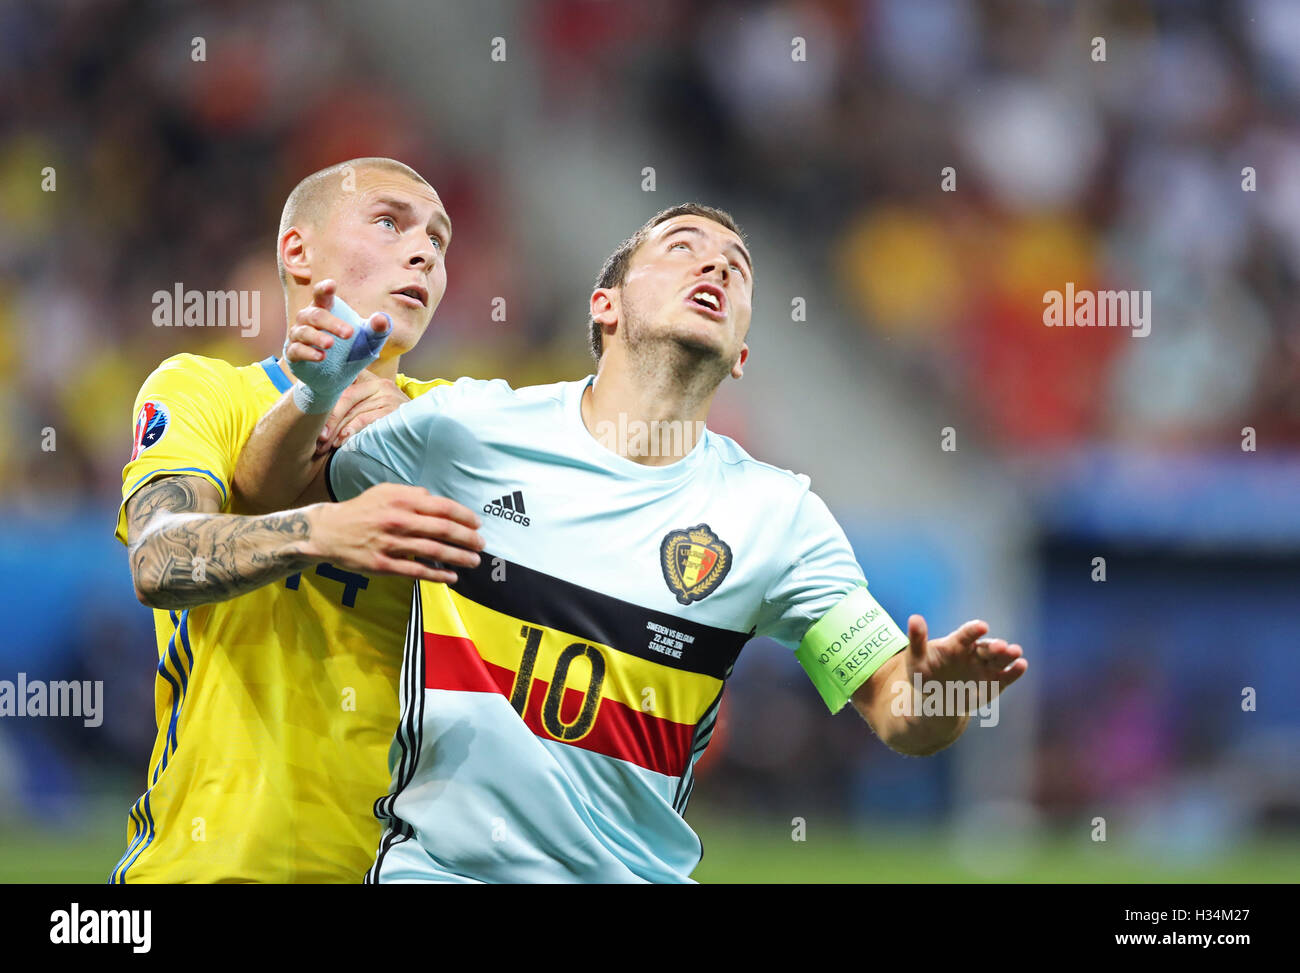 NICE, FRANCE - JUNE 22, 2016: Victor Lindelof of Sweden (L) fights for a ball with Eden Hazard of Belgium during their UEFA EURO 2016 game at Allianz Riviera Stade de Nice, City of Nice, France Stock Photo